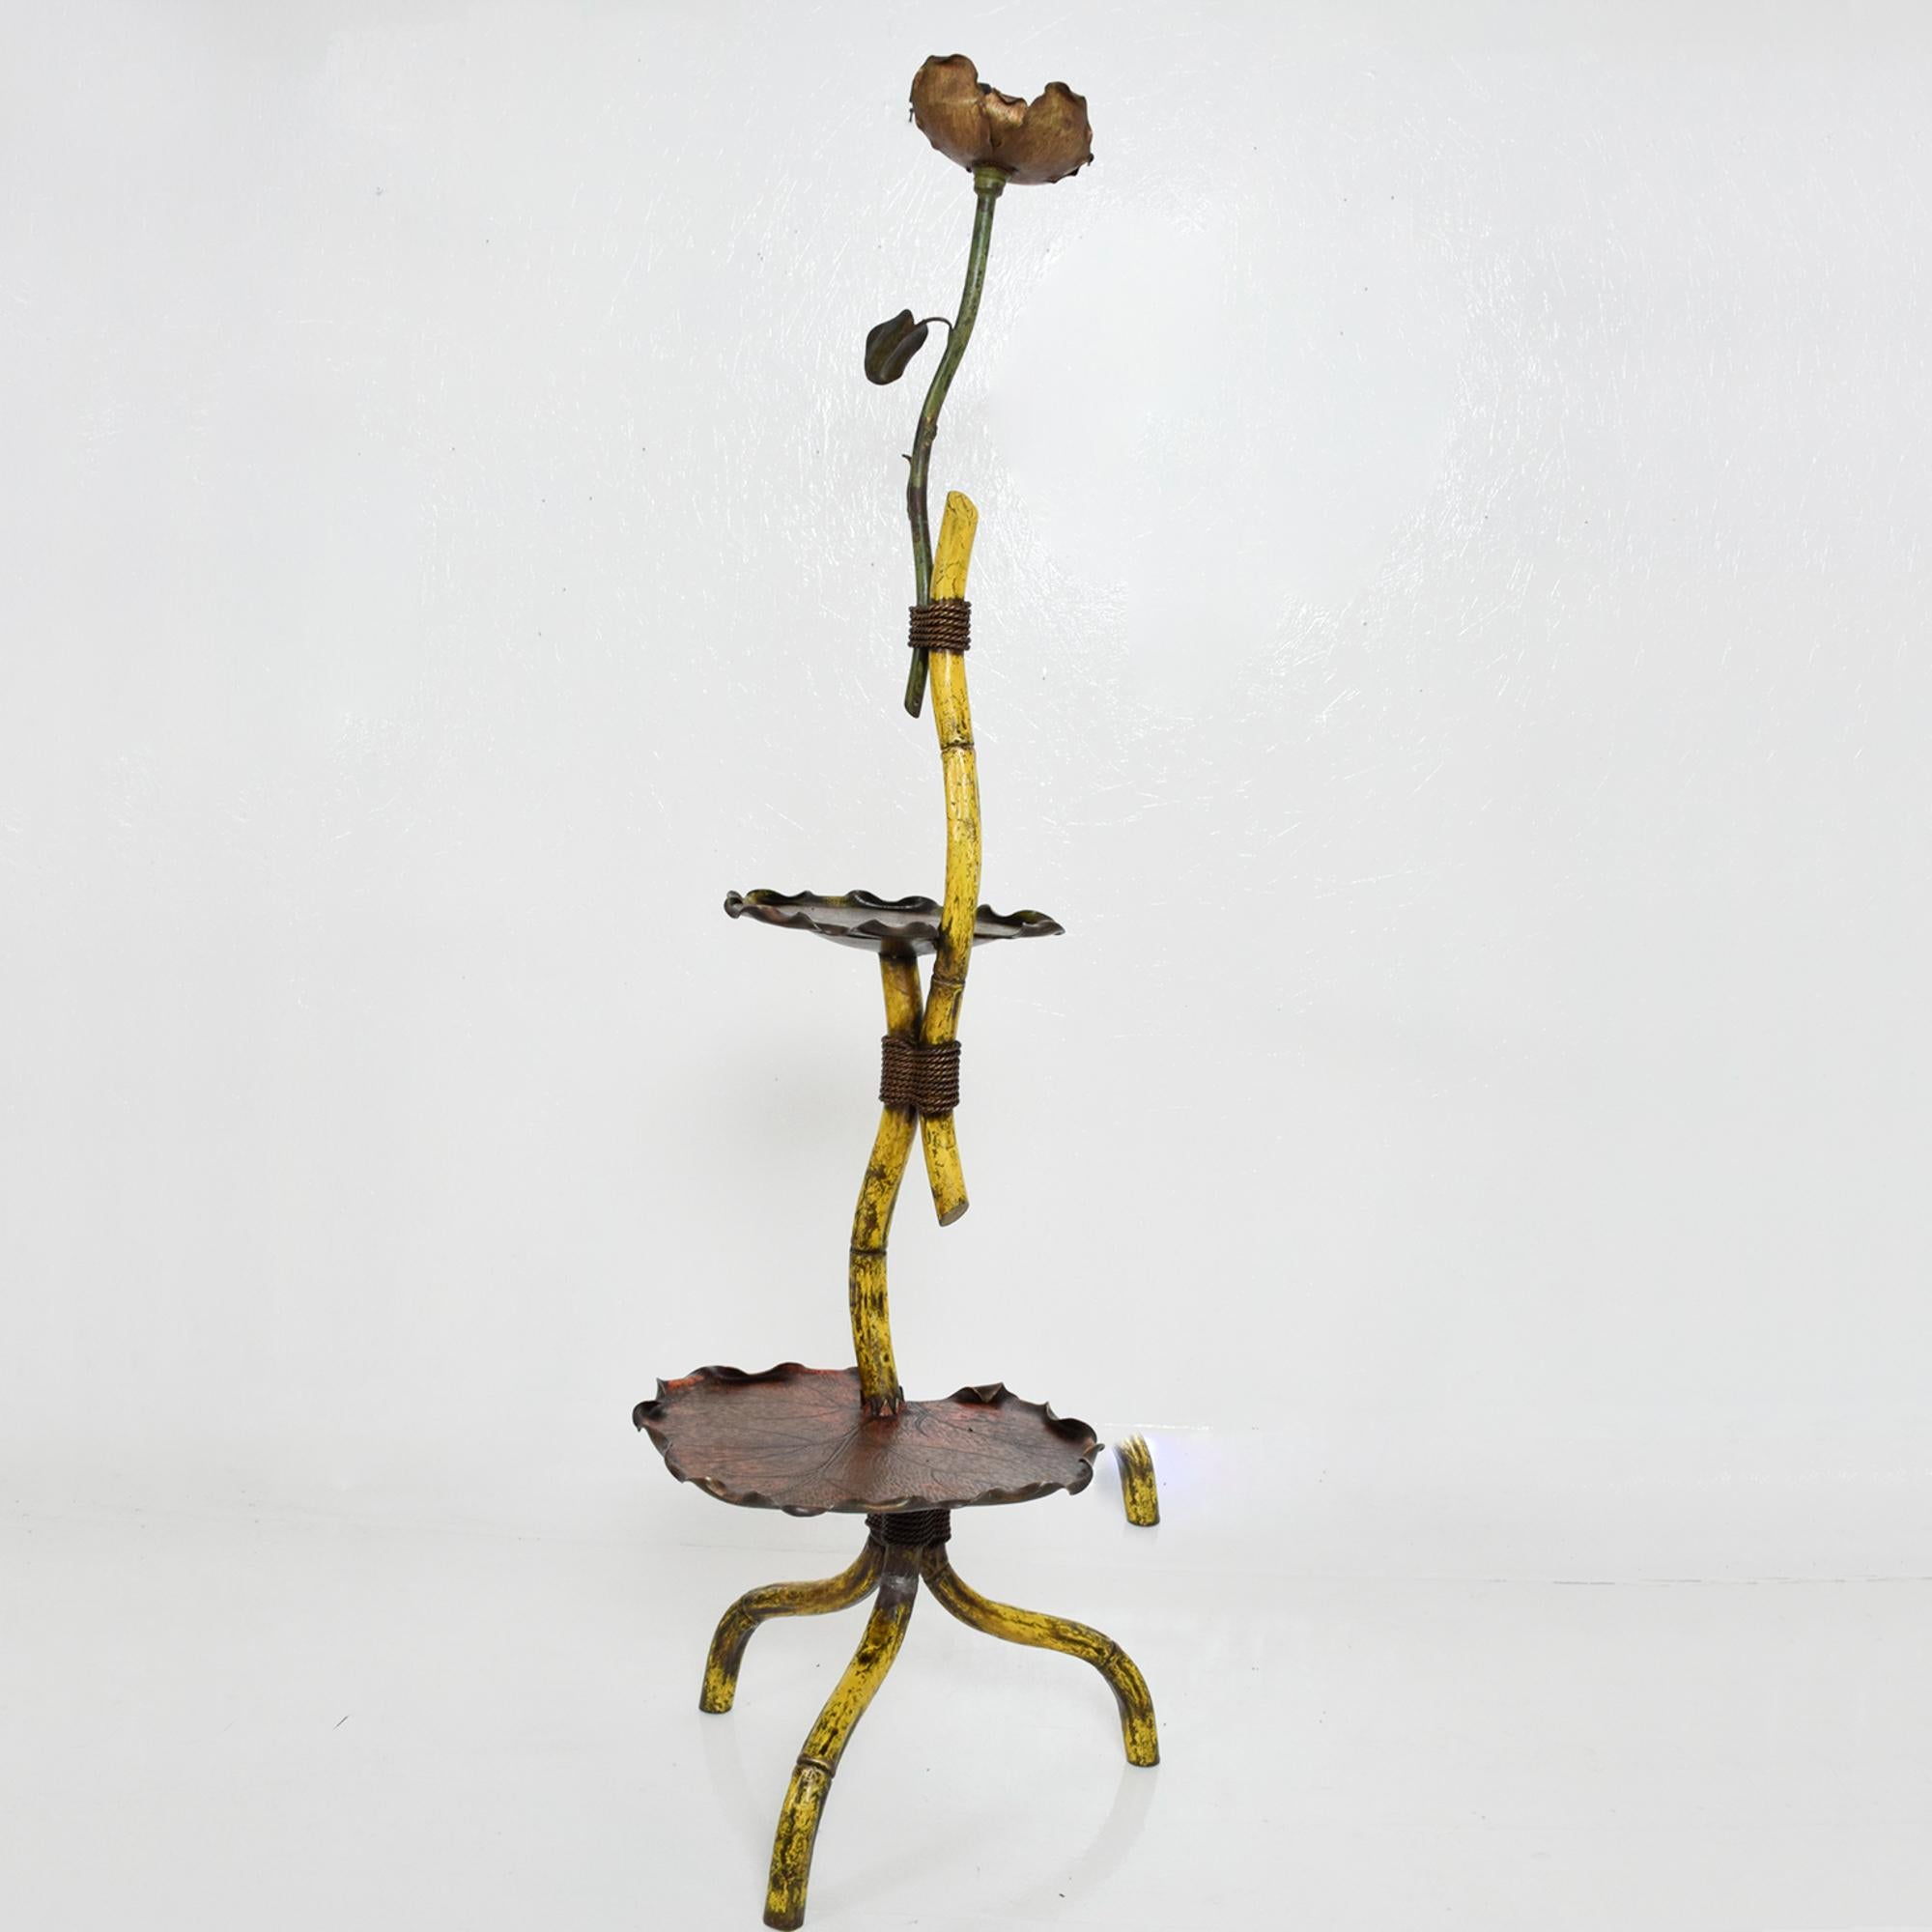 Art Deco graceful budding flower floor lamp in bronze 1930s Regency sculptural beauty with lovely petal leaf design useful as a tray.
In the style of Maison Jansen and Willy Daro.
Dimensions: 67